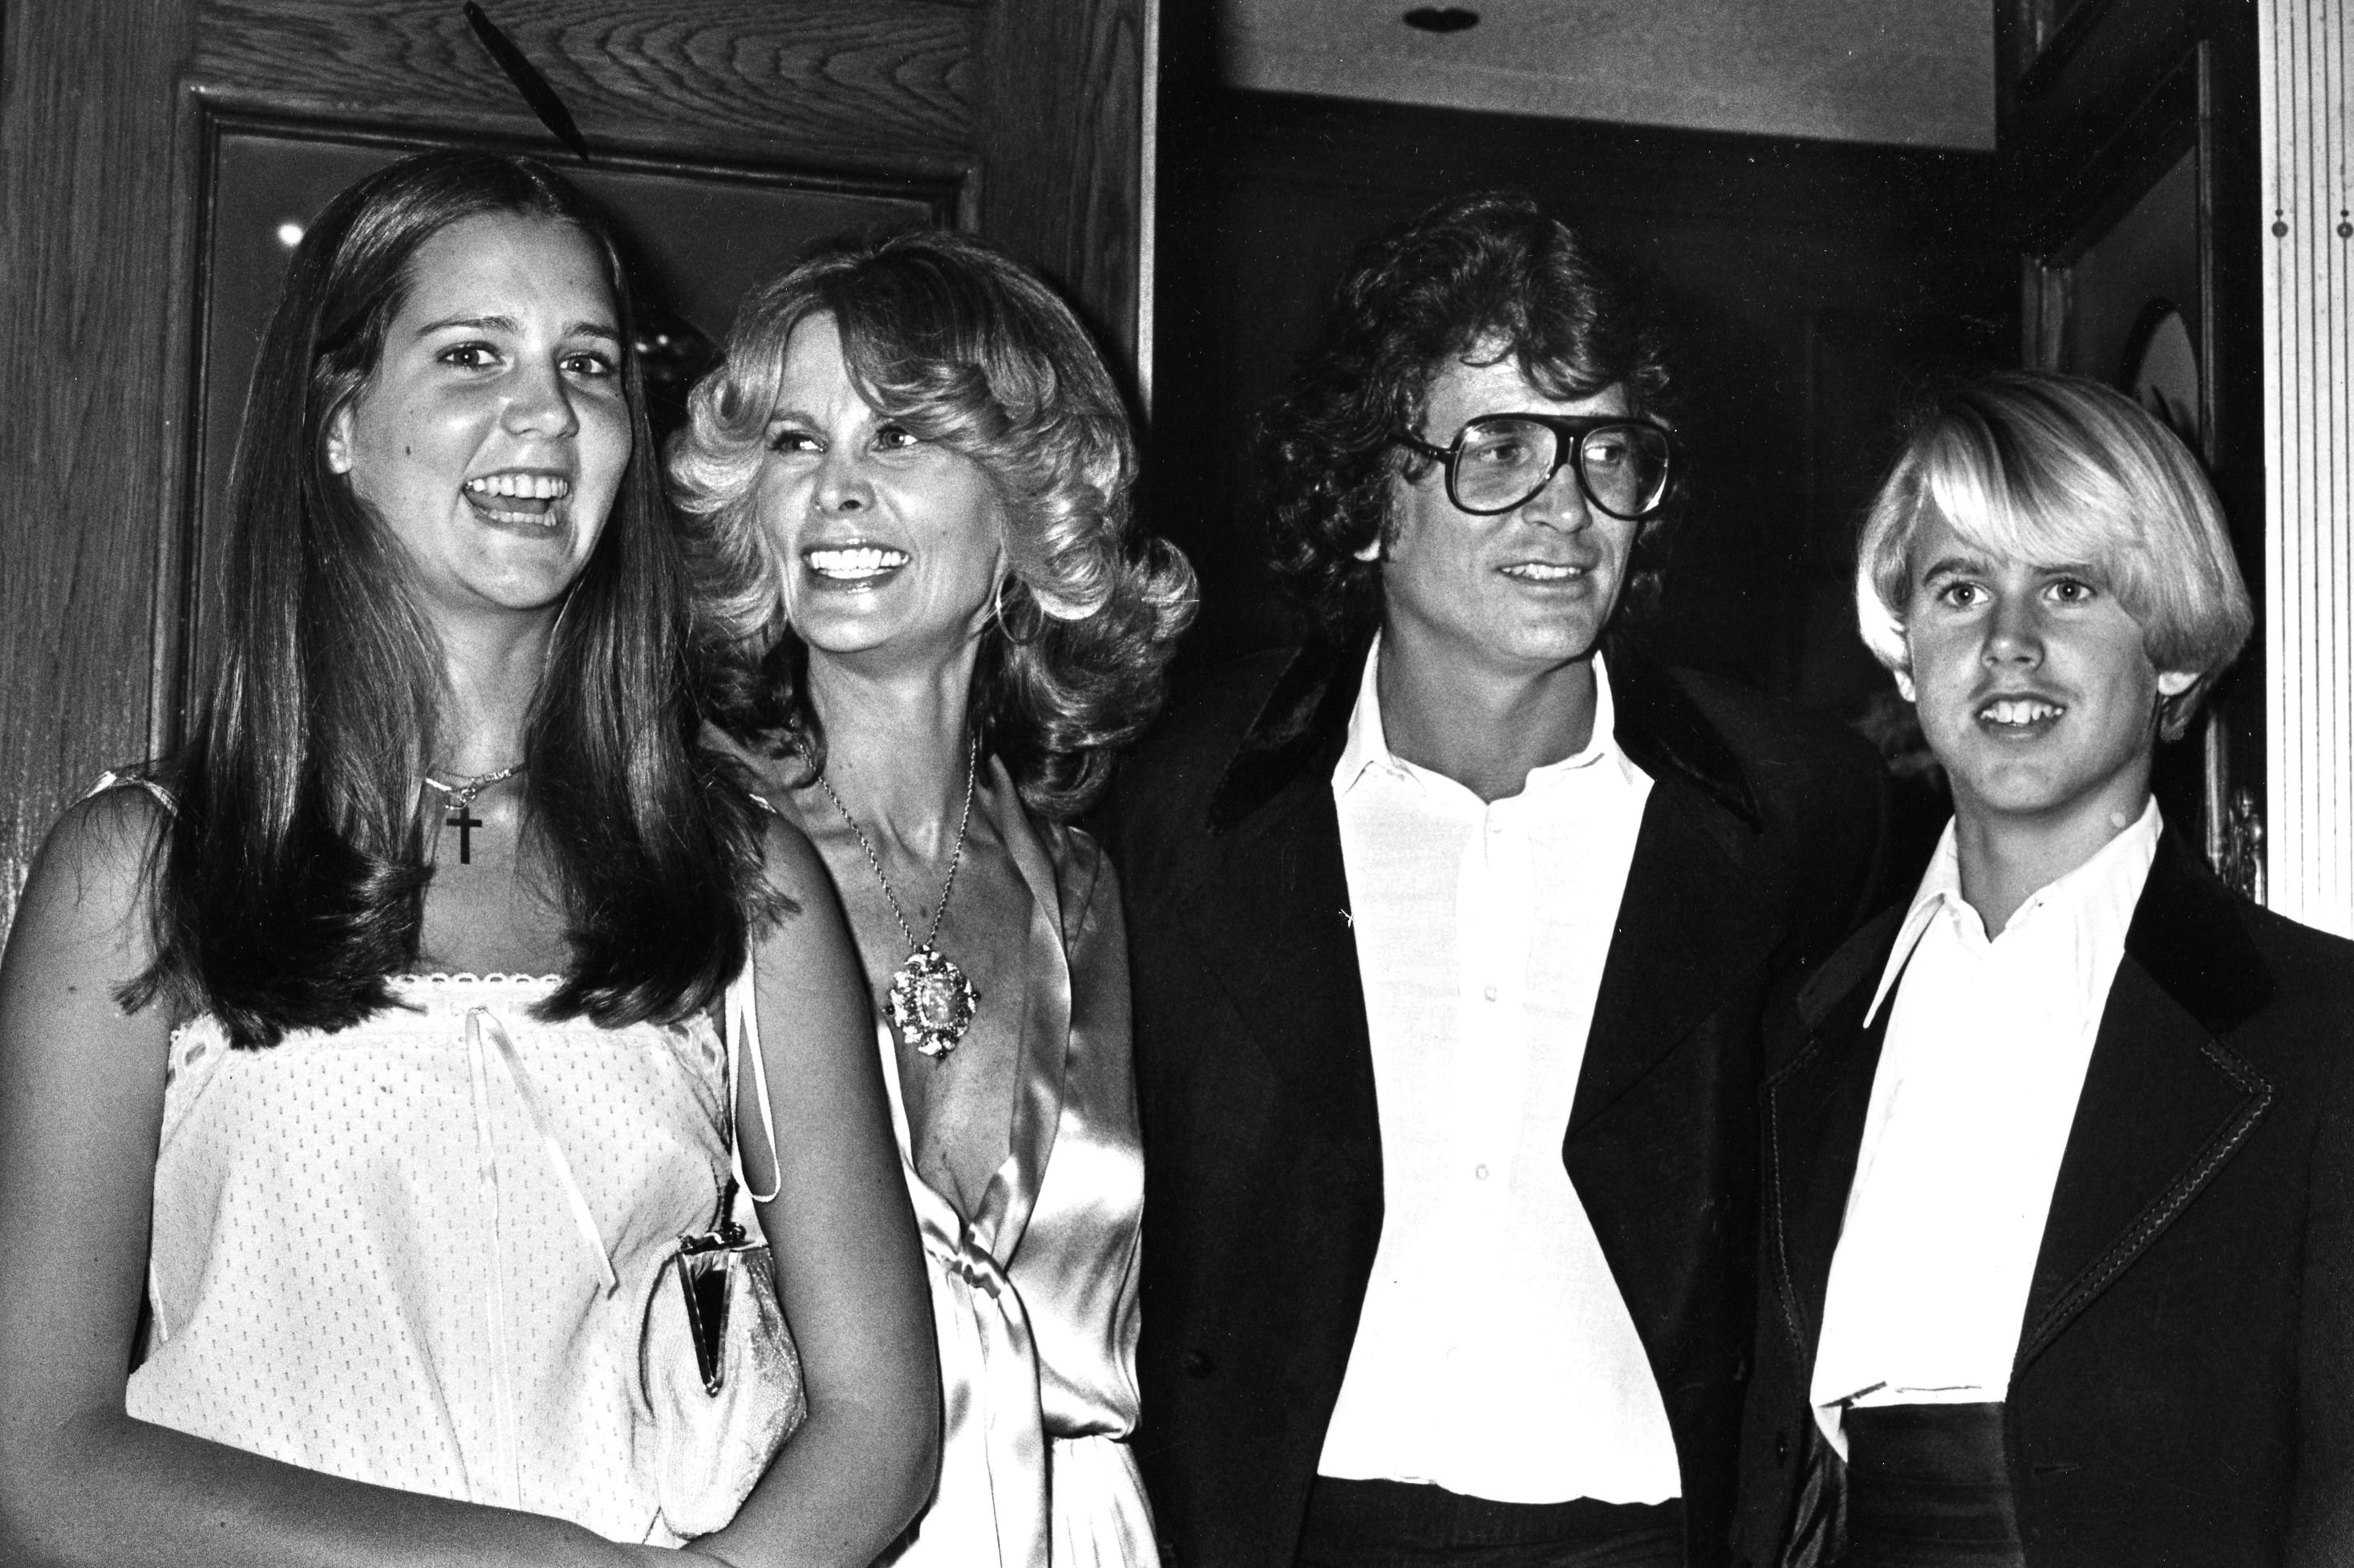 Leslie Landon, Marjorie Lynn Noe, Michael Landon Sr. and Michael Landon Jr. at the 4th Annual People's Choice Awards on February 20, 1978, in Los Angeles, California. | Source: Ron Galella/Ron Galella Collection/Getty Images